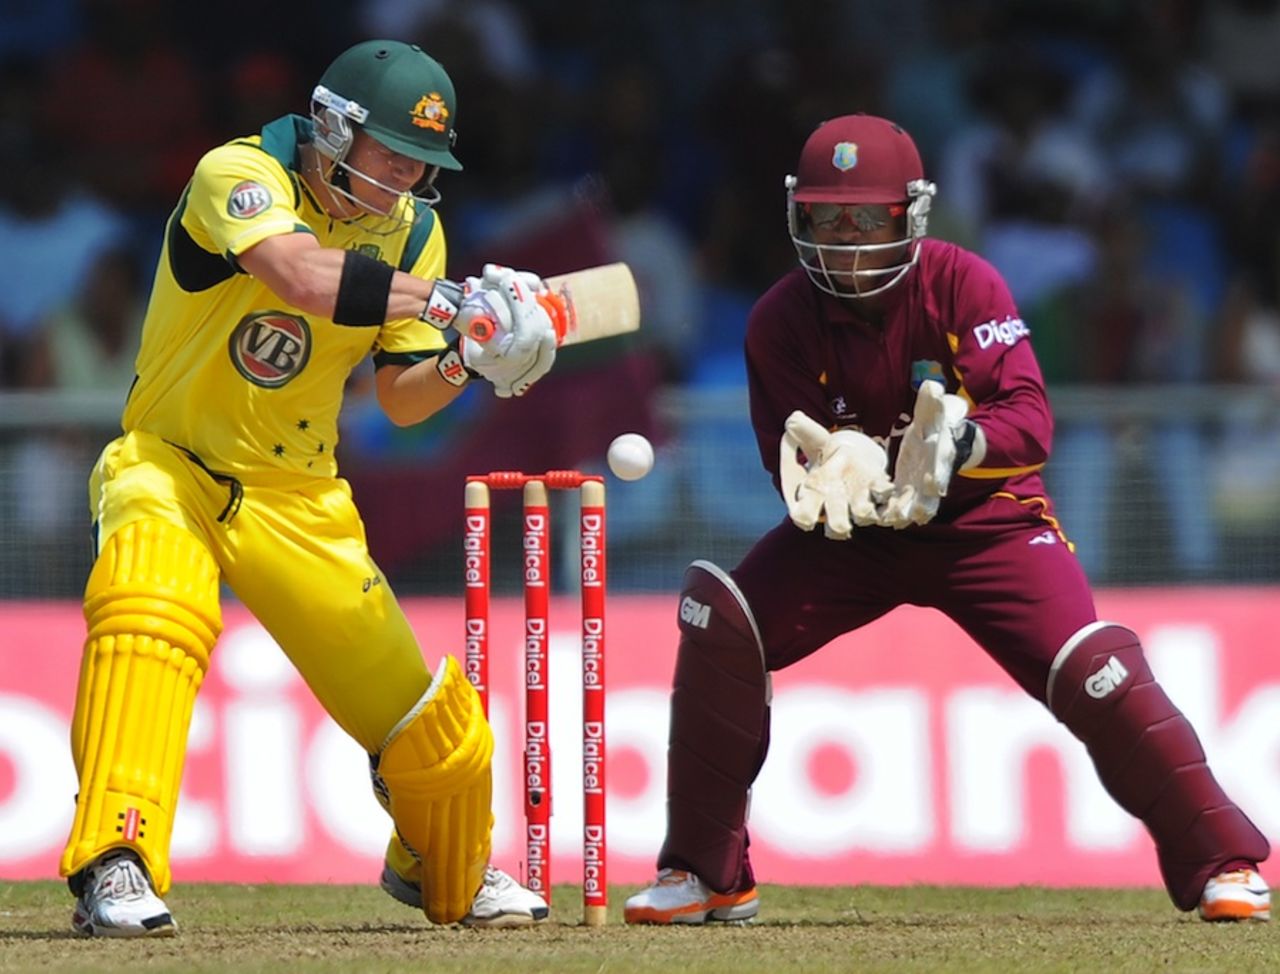 David Warner goes back to cut during his innings of 40, West Indies v Australia, 1st ODI, St Vincent, March 16, 2012